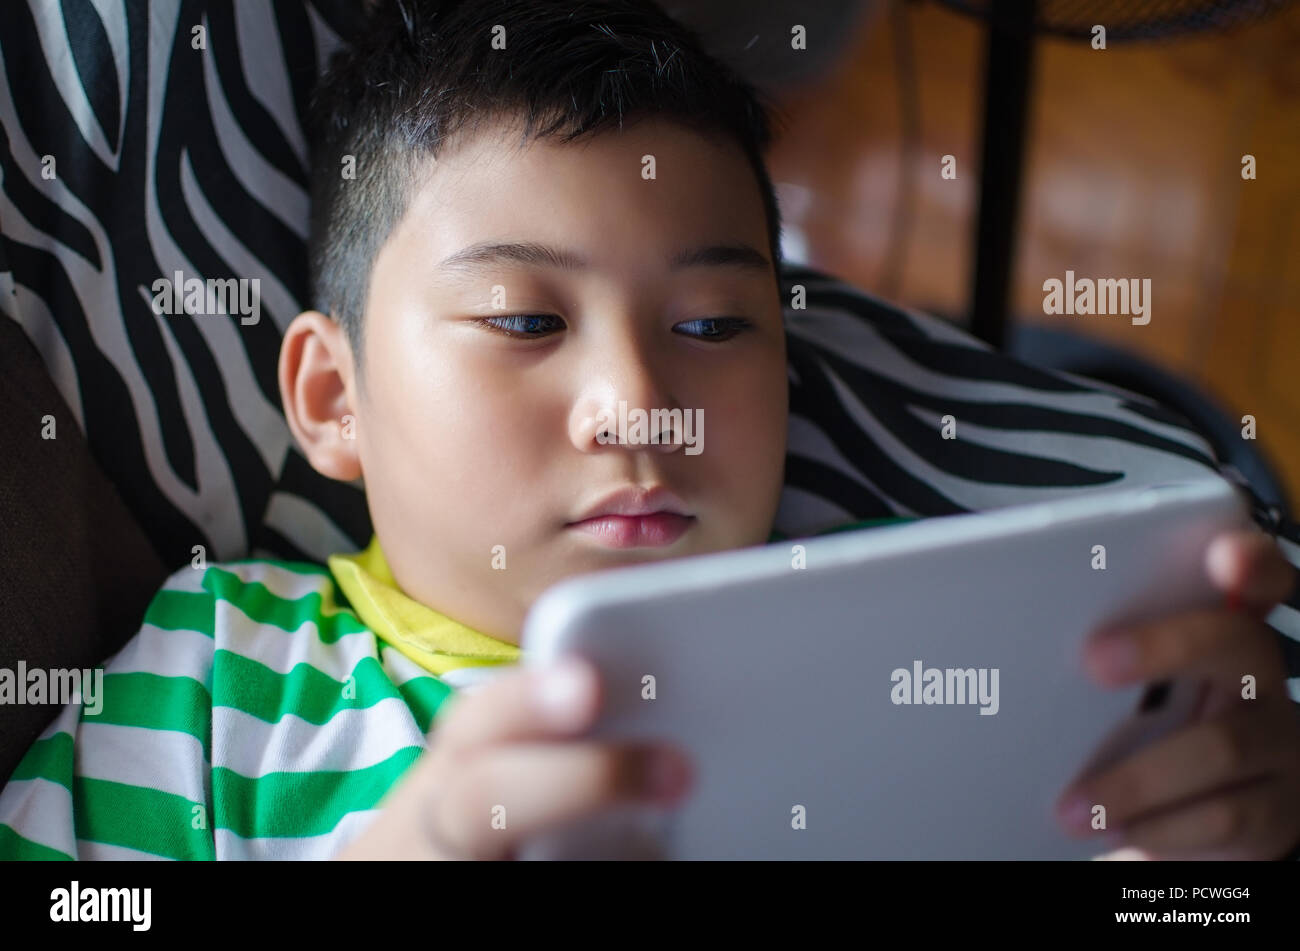 A young boy, new generation kid lying down in a sofa playing a game on a tablet computer at home. Stock Photo